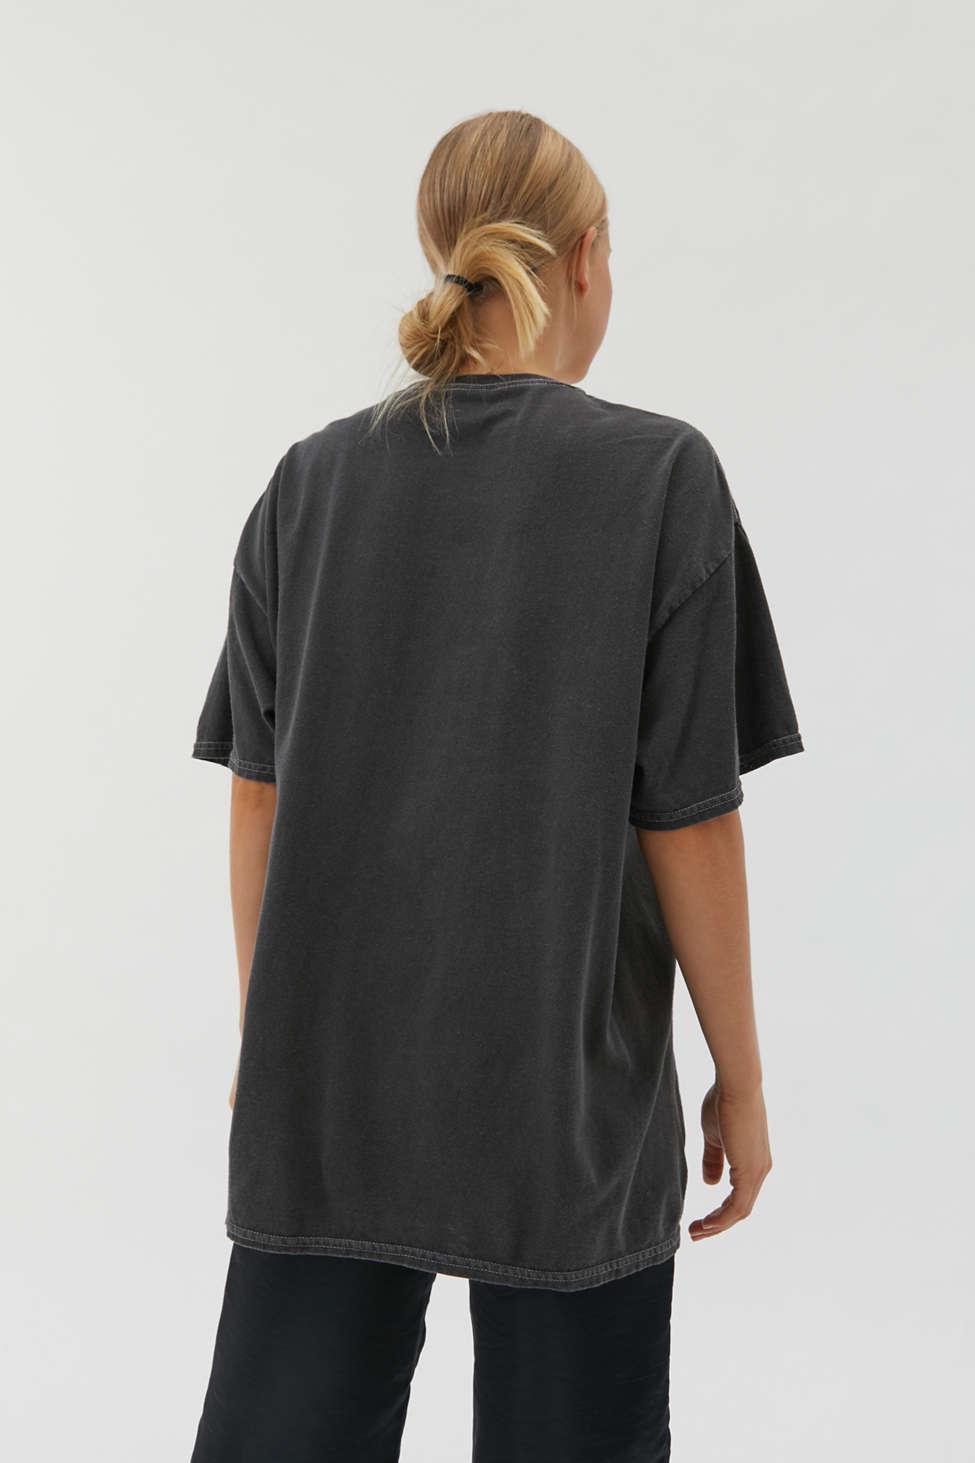 Urban Outfitters Nirvana In Utero Overdyed T-shirt Dress in Black 